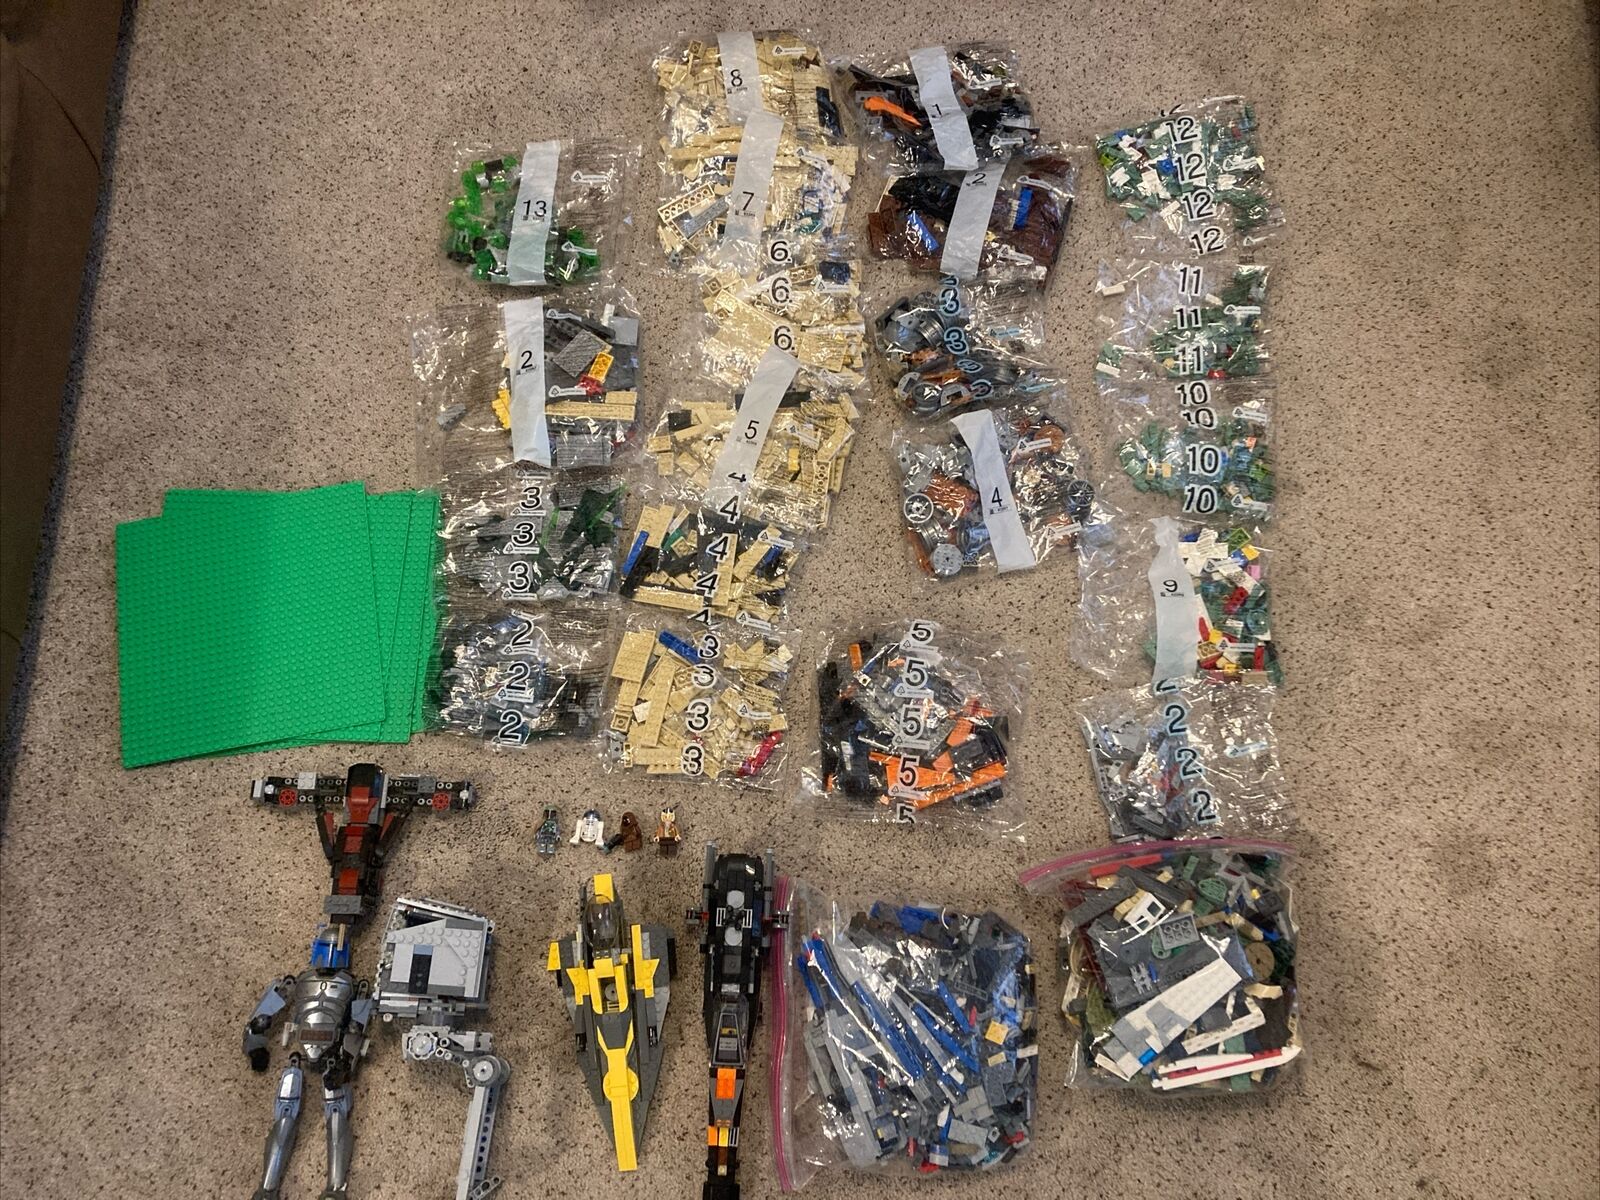 Lot of 10+ Lego Star Wars Set Parts w/ Figurines & Miscellaneous Parts